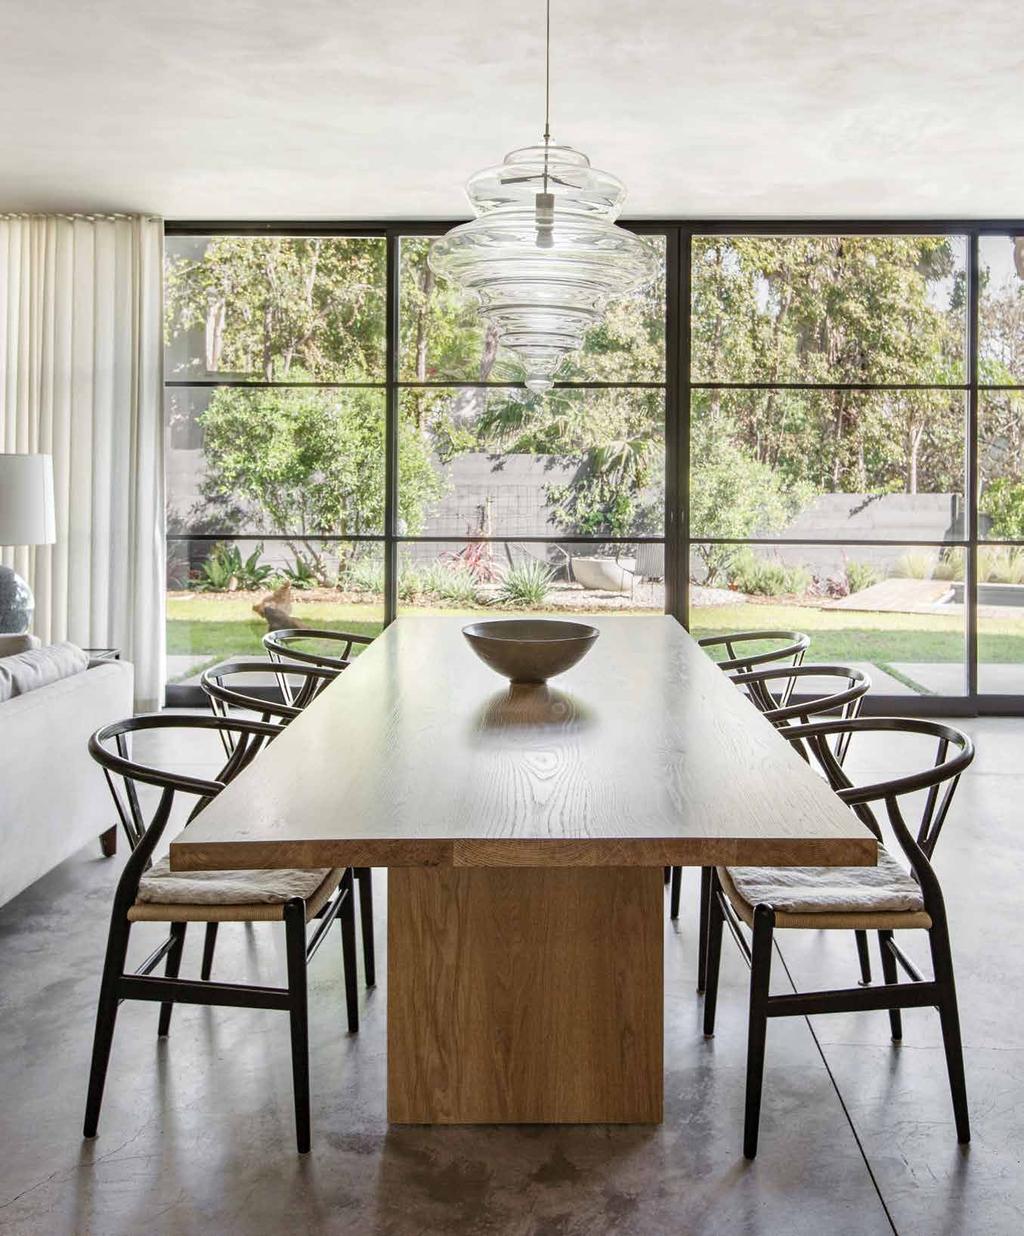 A handblown glass Lasvit pendant from The Line in New York hangs above a custom white-oak table in the dining area. A wall of Torrance Steel Window Co.